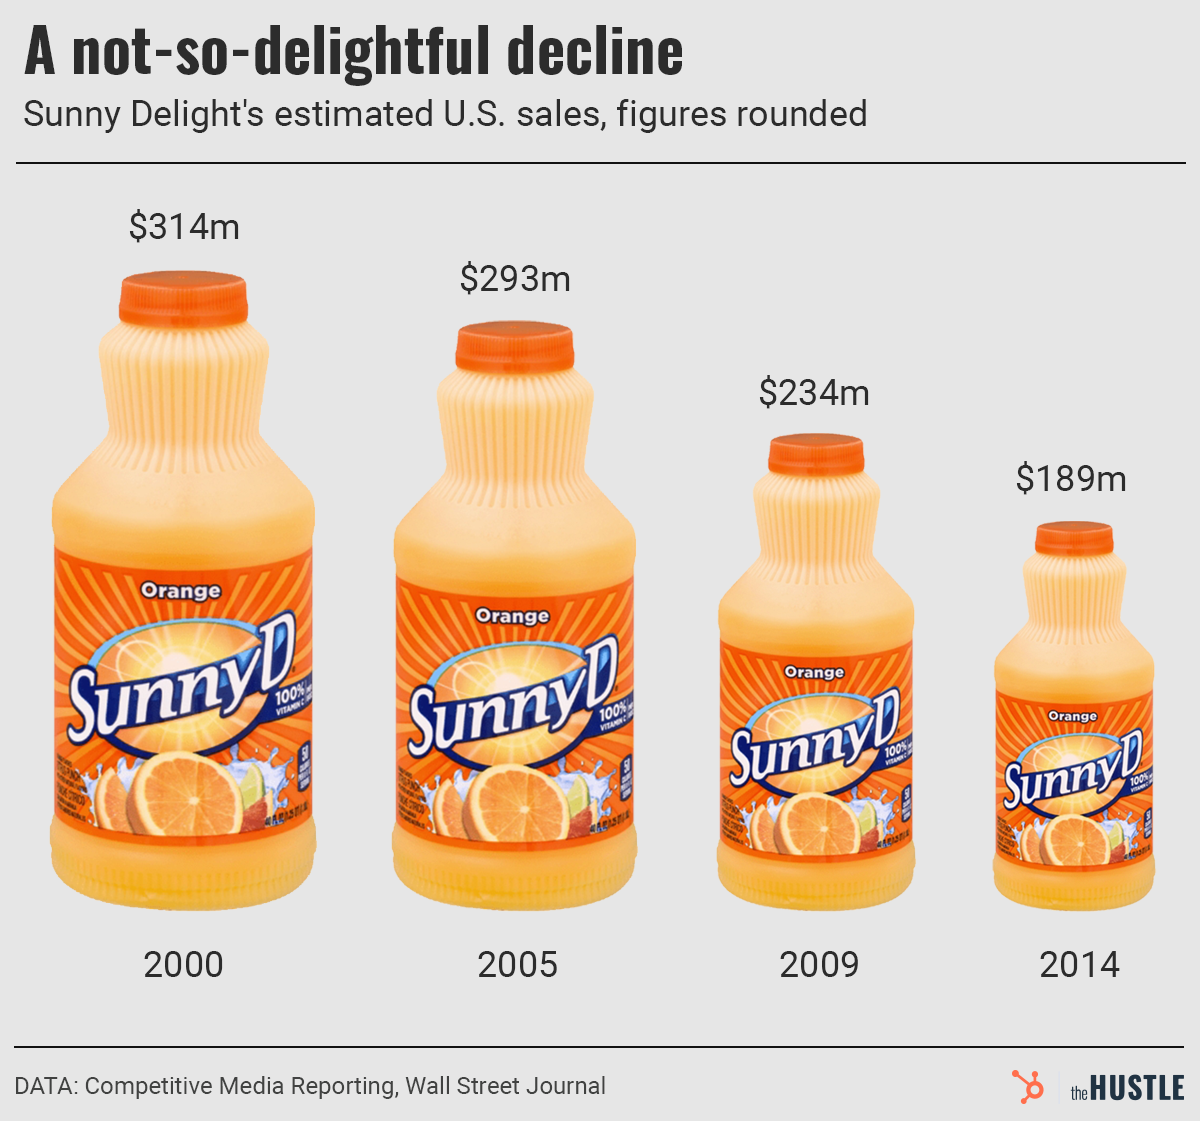 Sunny Delight's estimated U.S. sales by year